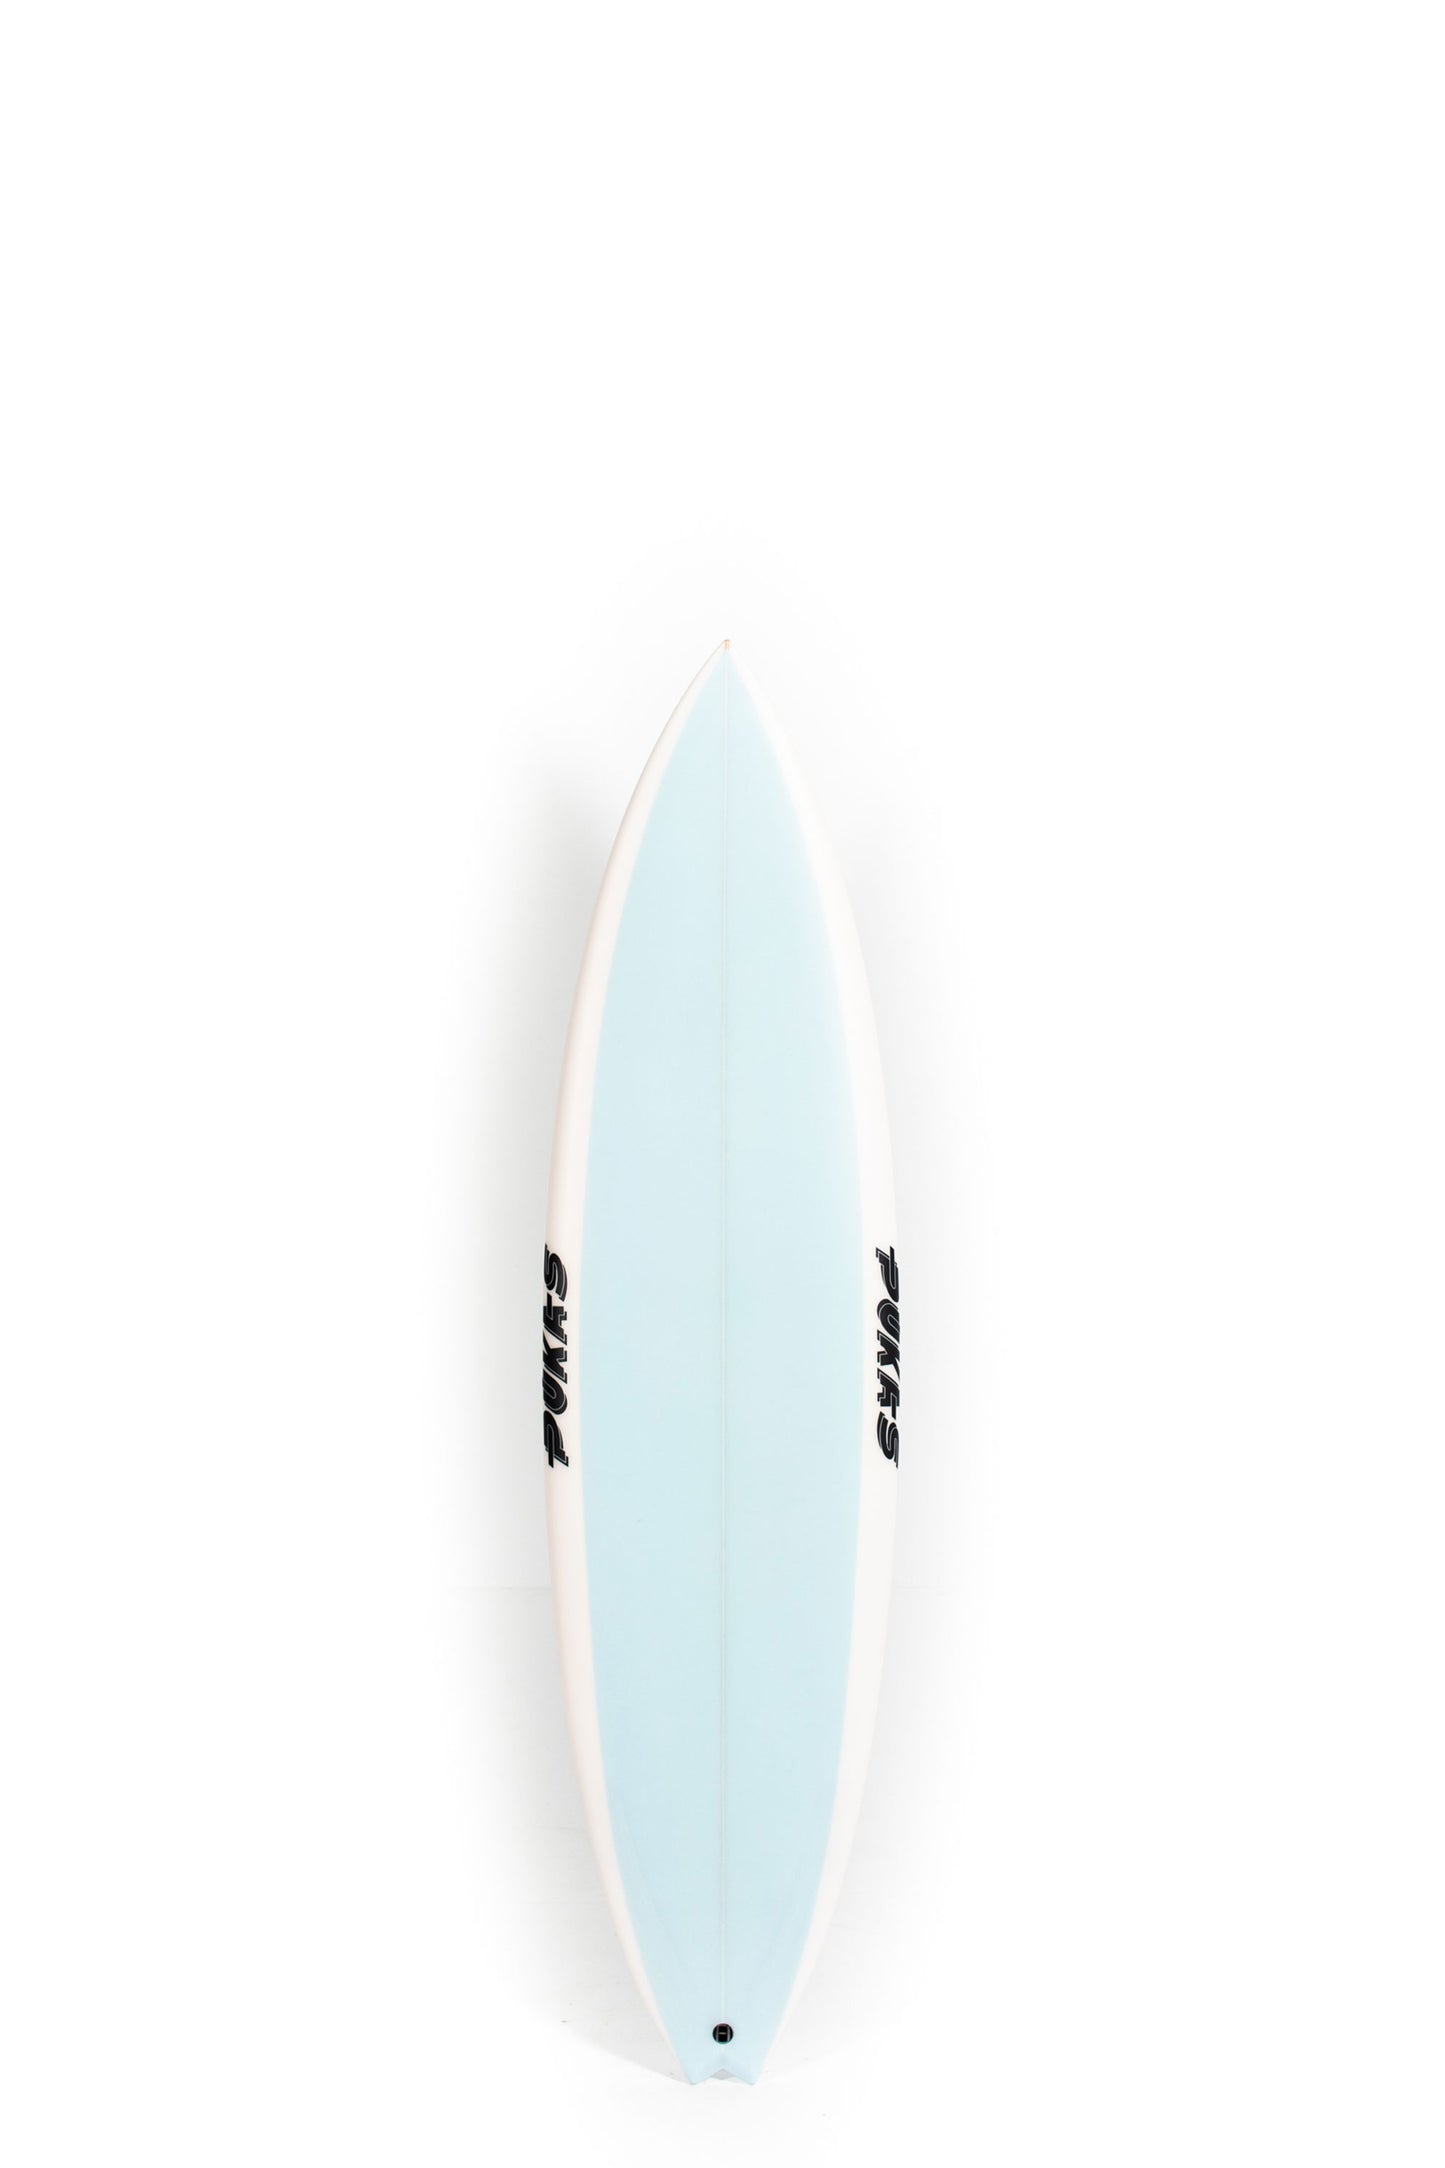 Pukas Surf Shop - Pukas Surfboard - BABY SWALLOW by Axel Lorentz - 6’3” x 18,87 x 2,31 - 29,8L -  AX07124